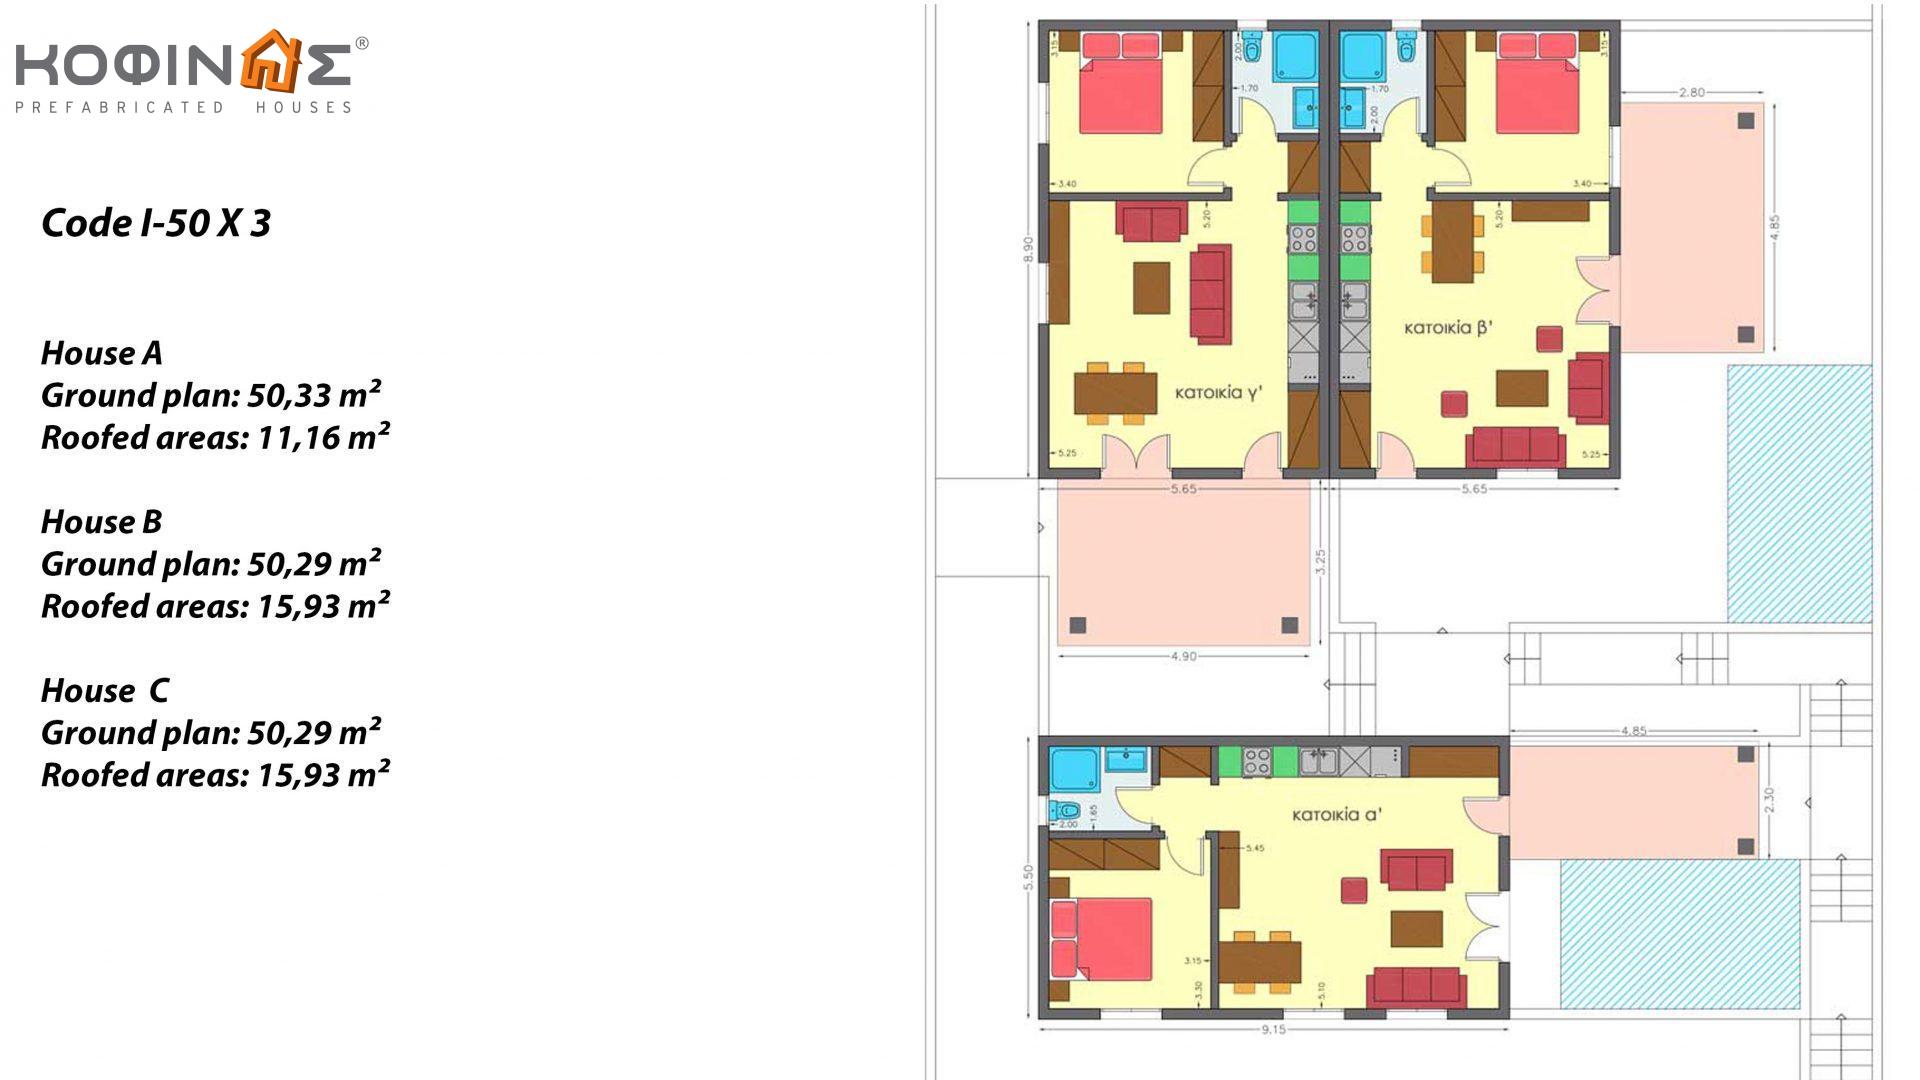 1-story house I-50, total surface of 50.30 m², covered roofed areas 11.16 m² for house A,15.93 m² for house B and 15.93 m² for house C